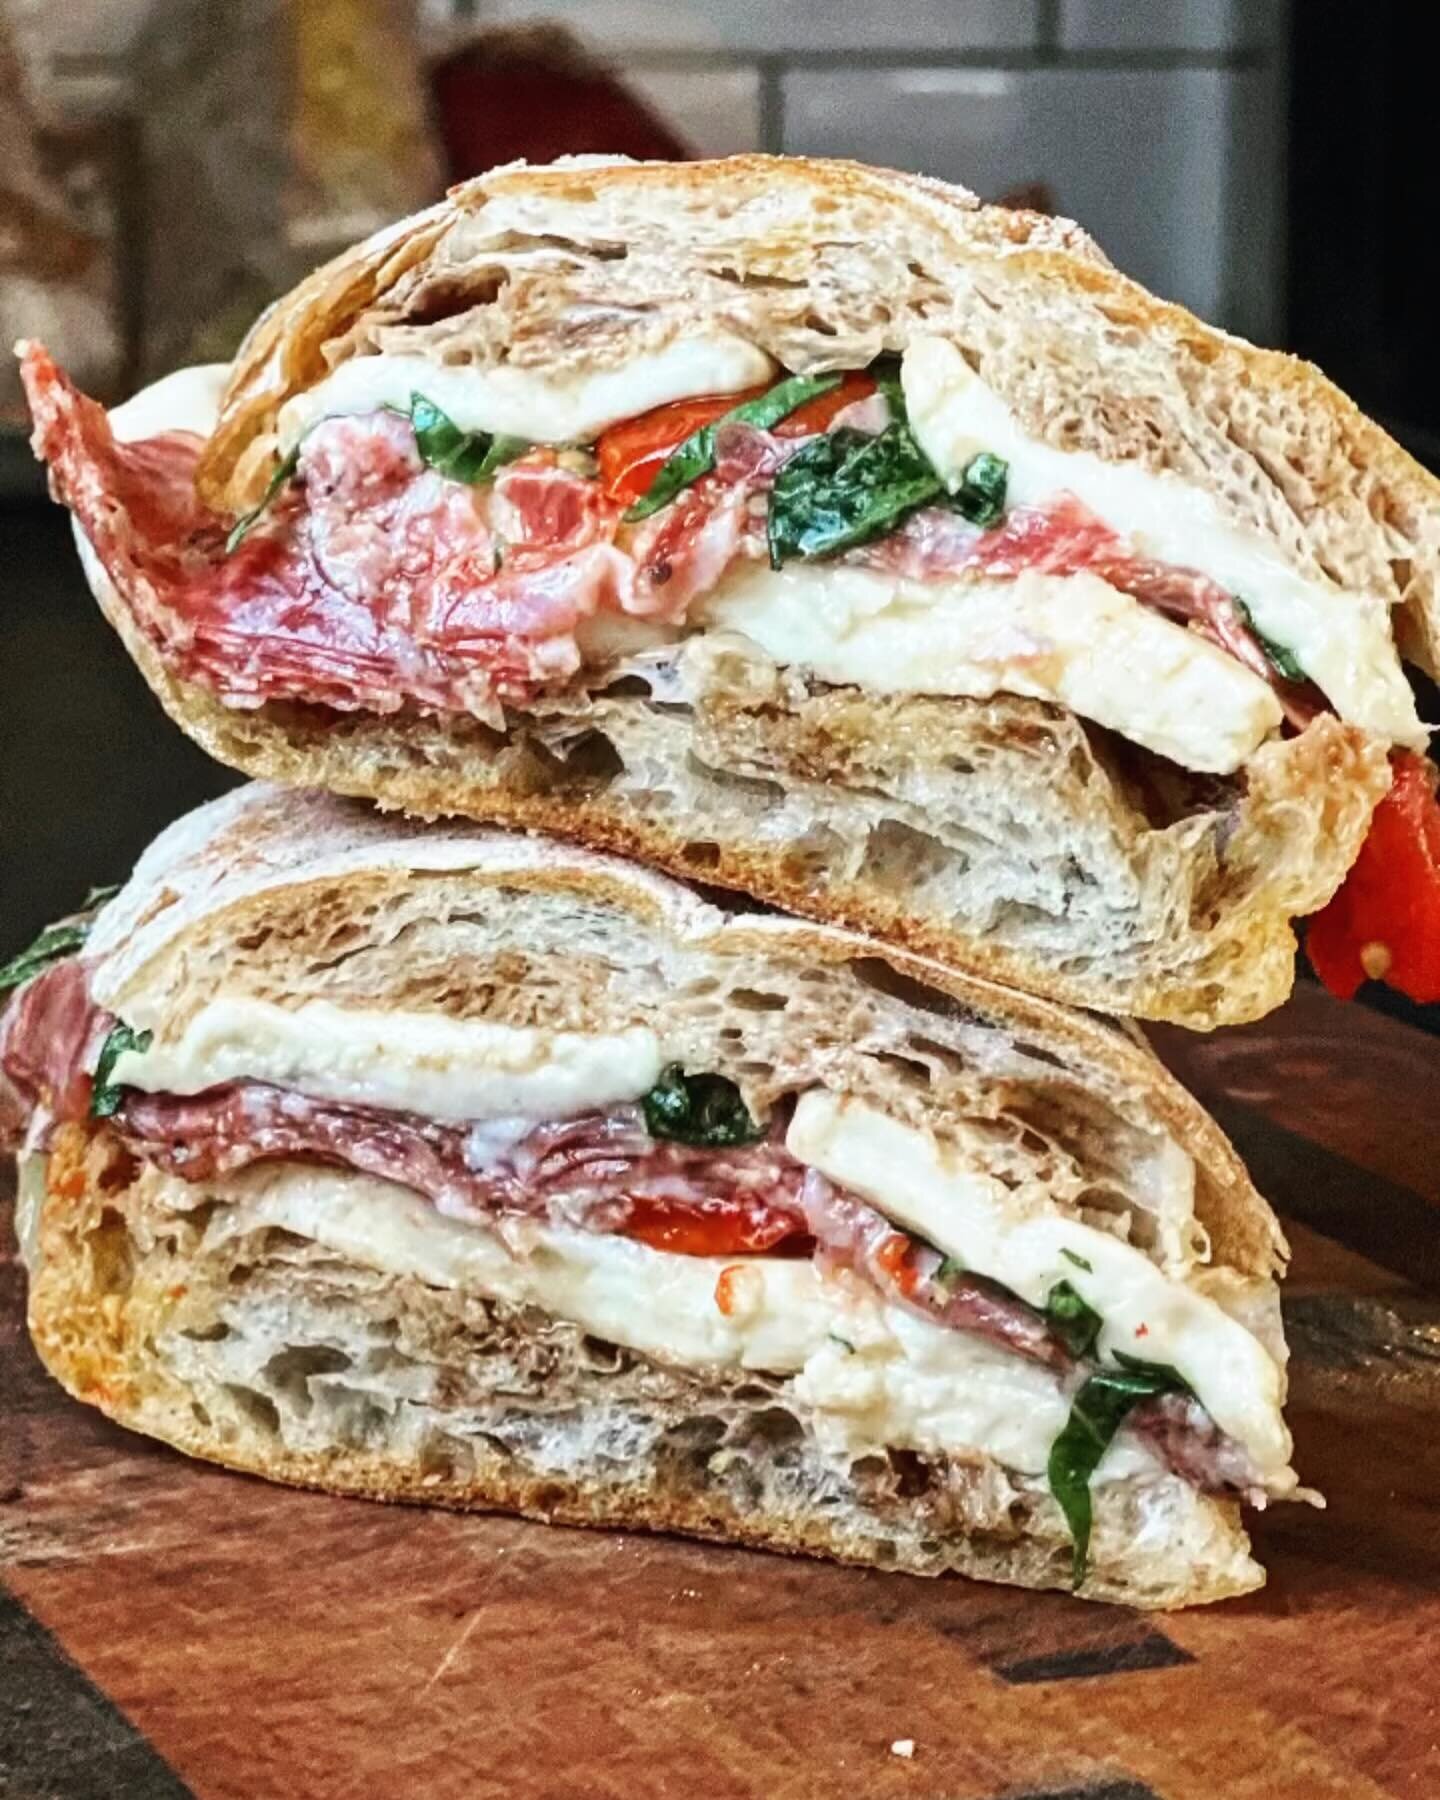 Ciao Bella is probs our most popular sandwich for good reason - we start with artisan ciabatta from @grandaisybakery add some extra virgin olive oil and @giusti1605 aged balsamic, then we melt fresh mozzarella and add house made tomato garlic confit.